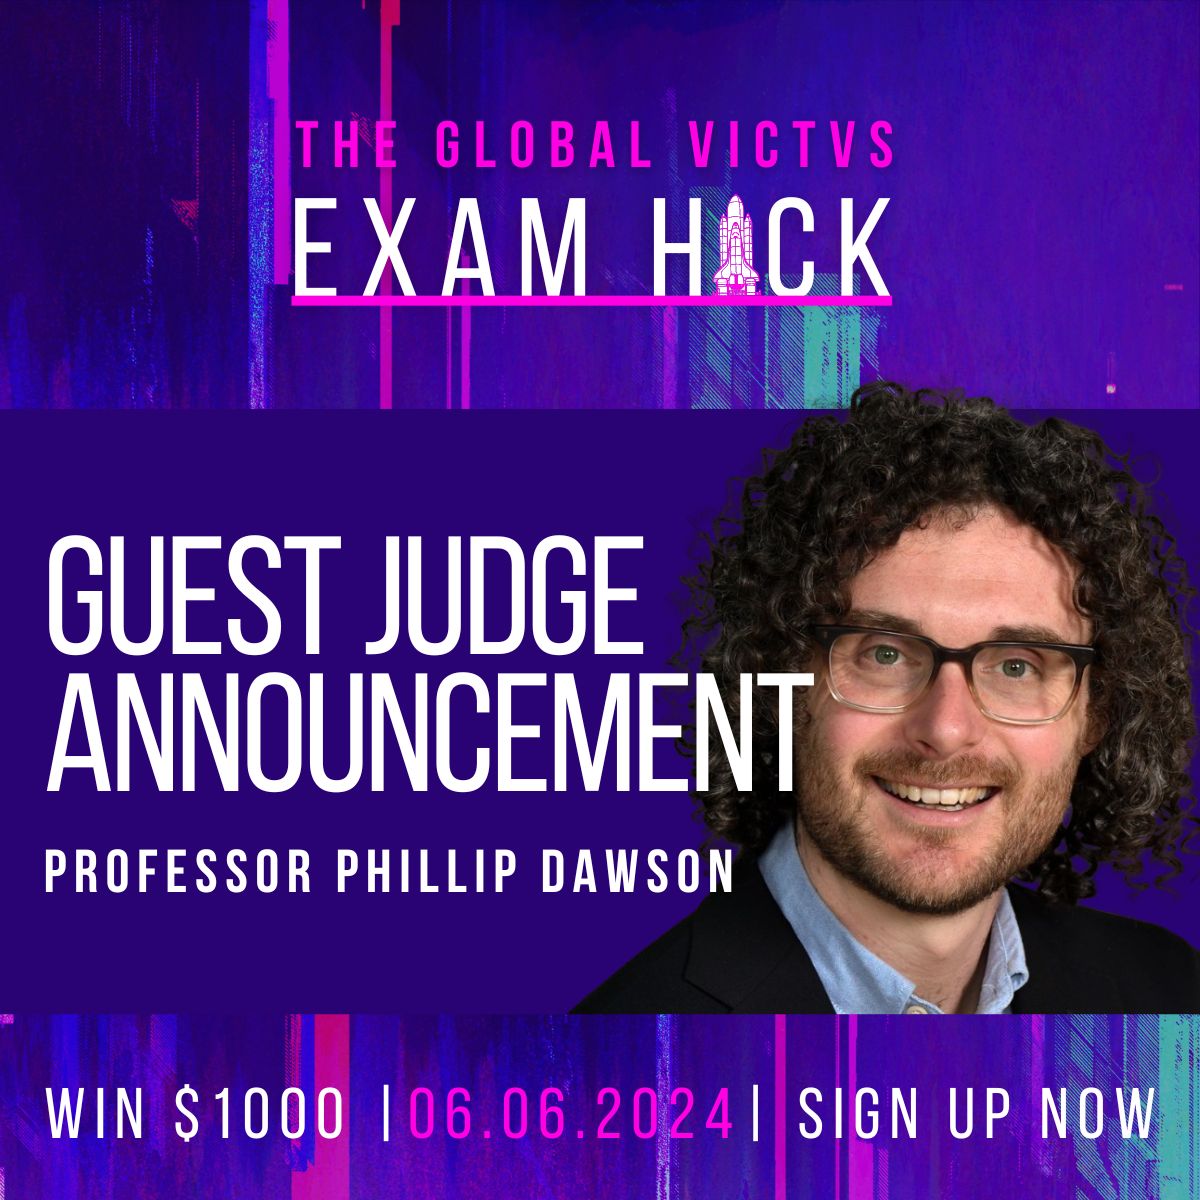 Excited to announce I'll be one of the judges for this exam hacking competition. The most innovative and interesting hack wins $1000. So good to see an exams company engage with hacking and cheating head on like this victvs.co.uk/2024/04/19/exa…